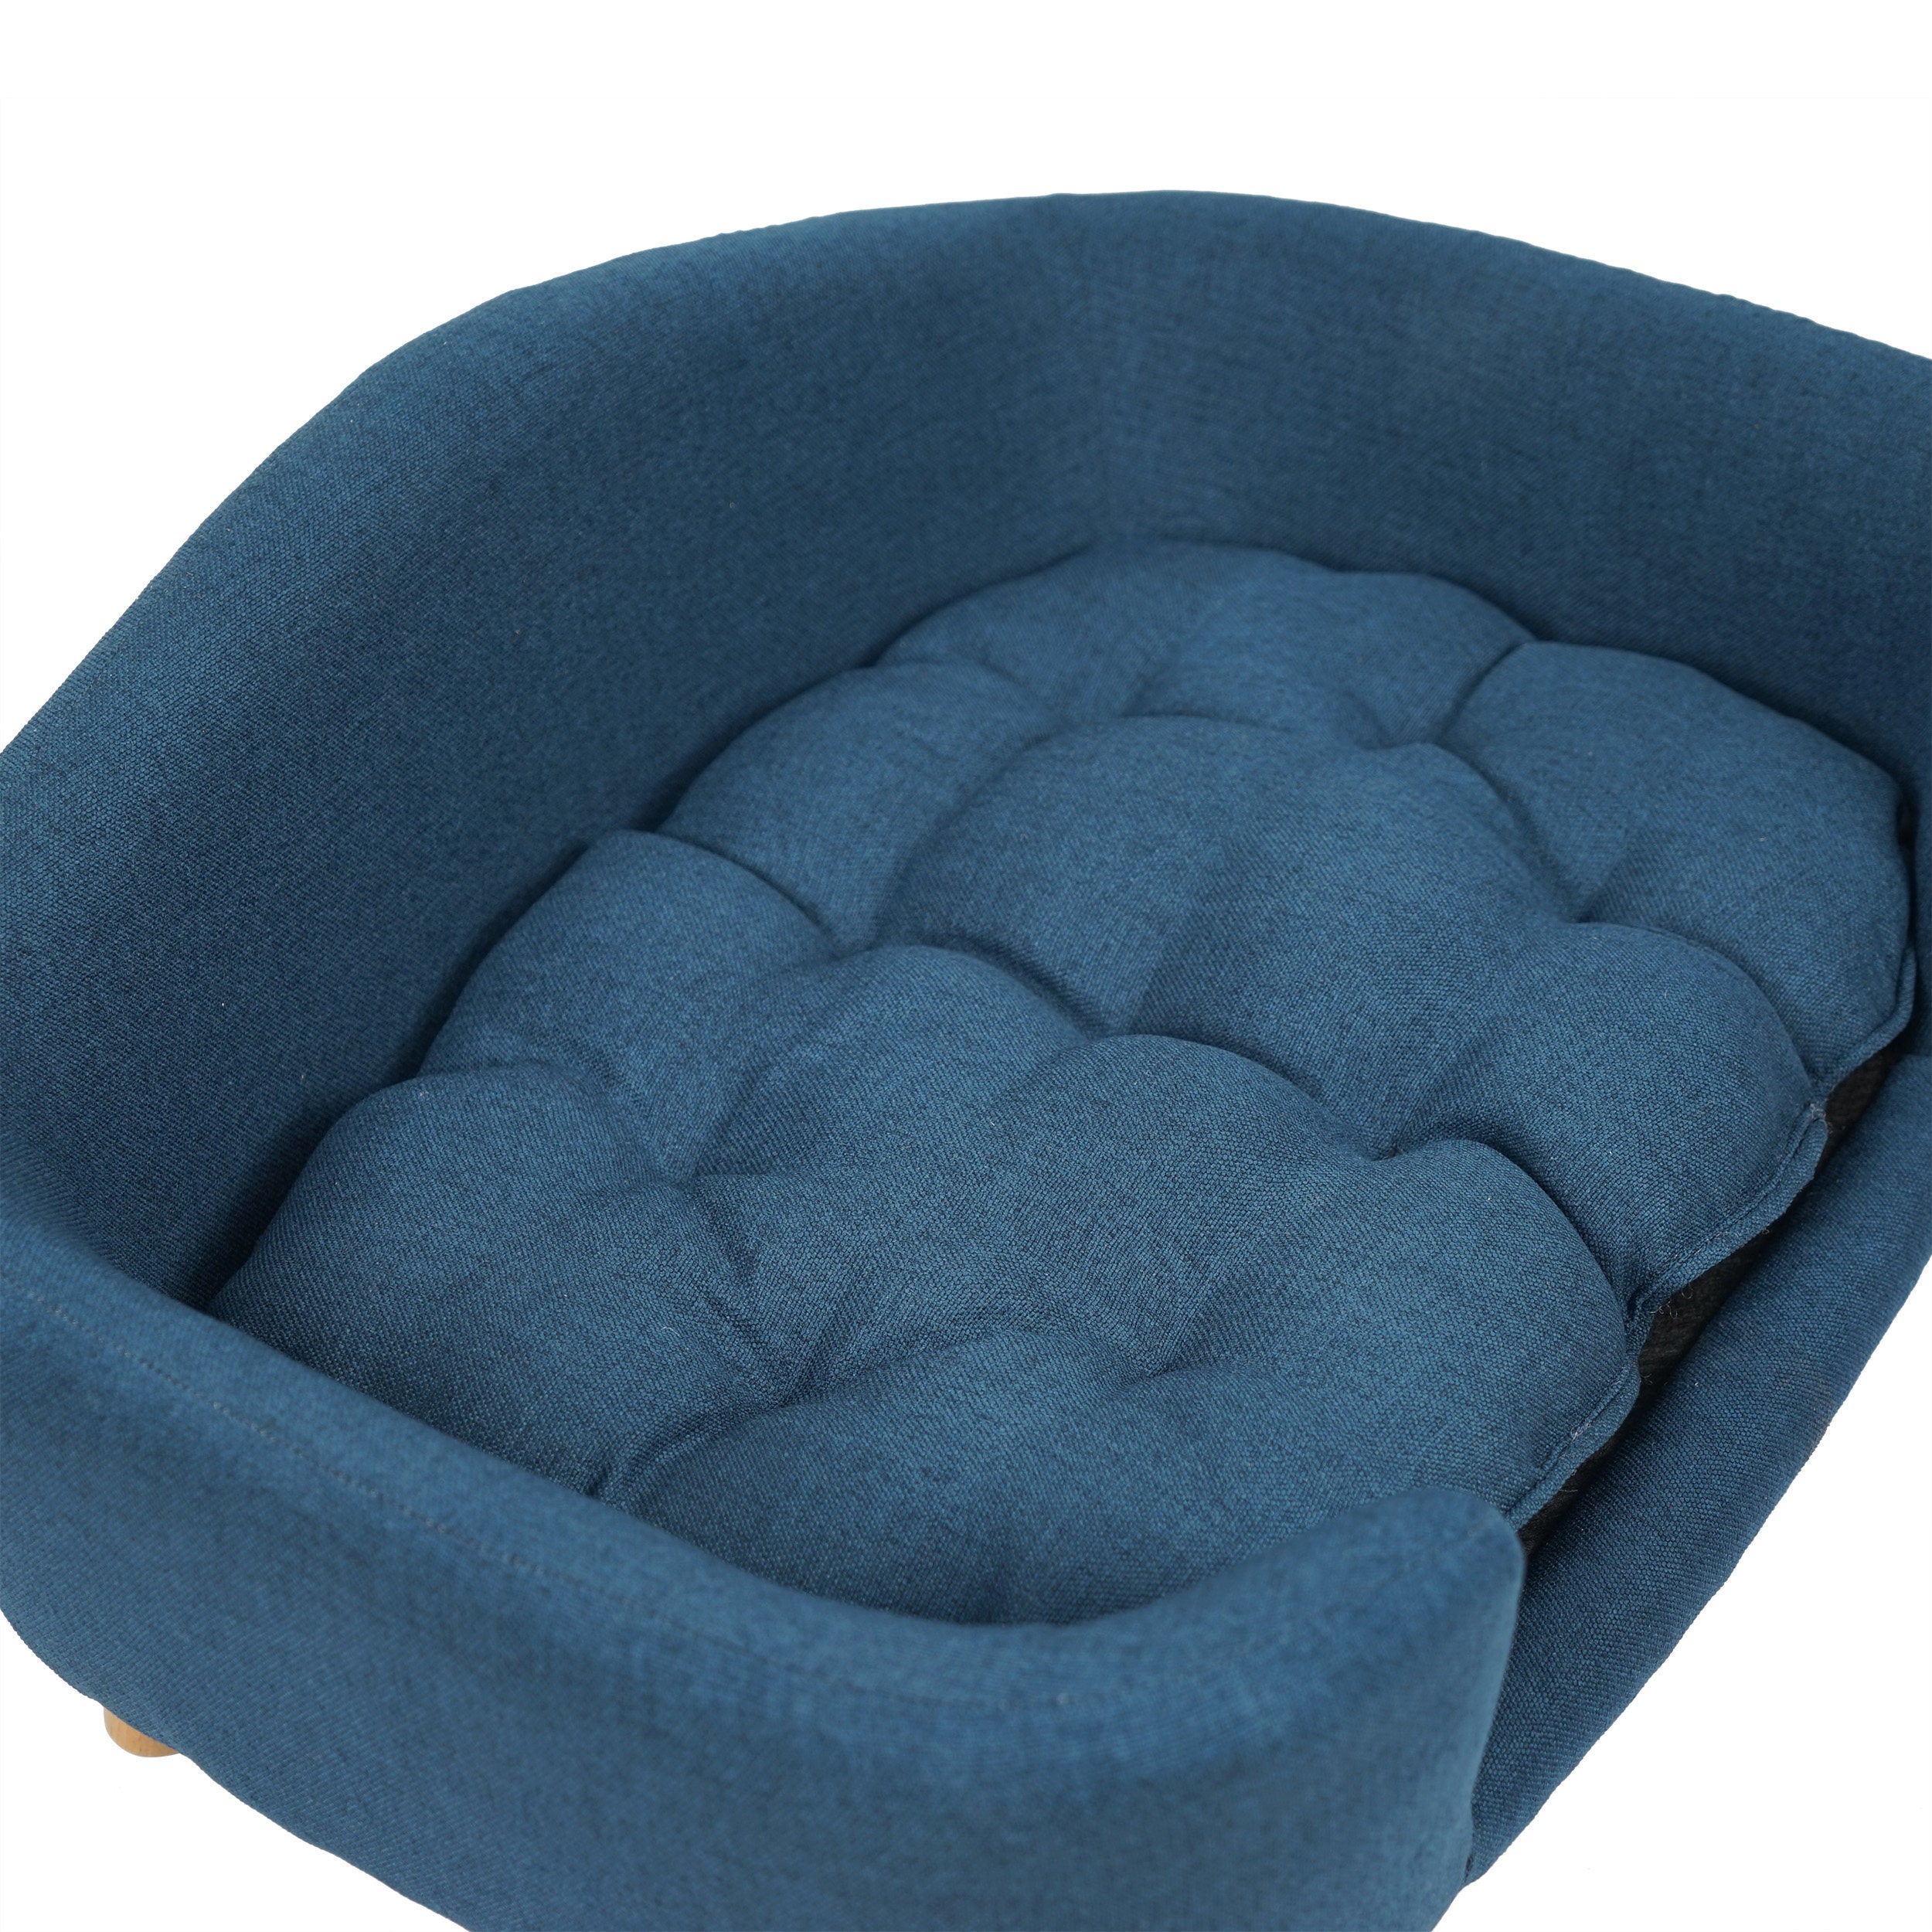 GDF Studio Samuel Mid Century Small Plush Dog Bed， Navy Blue and Natural Finish